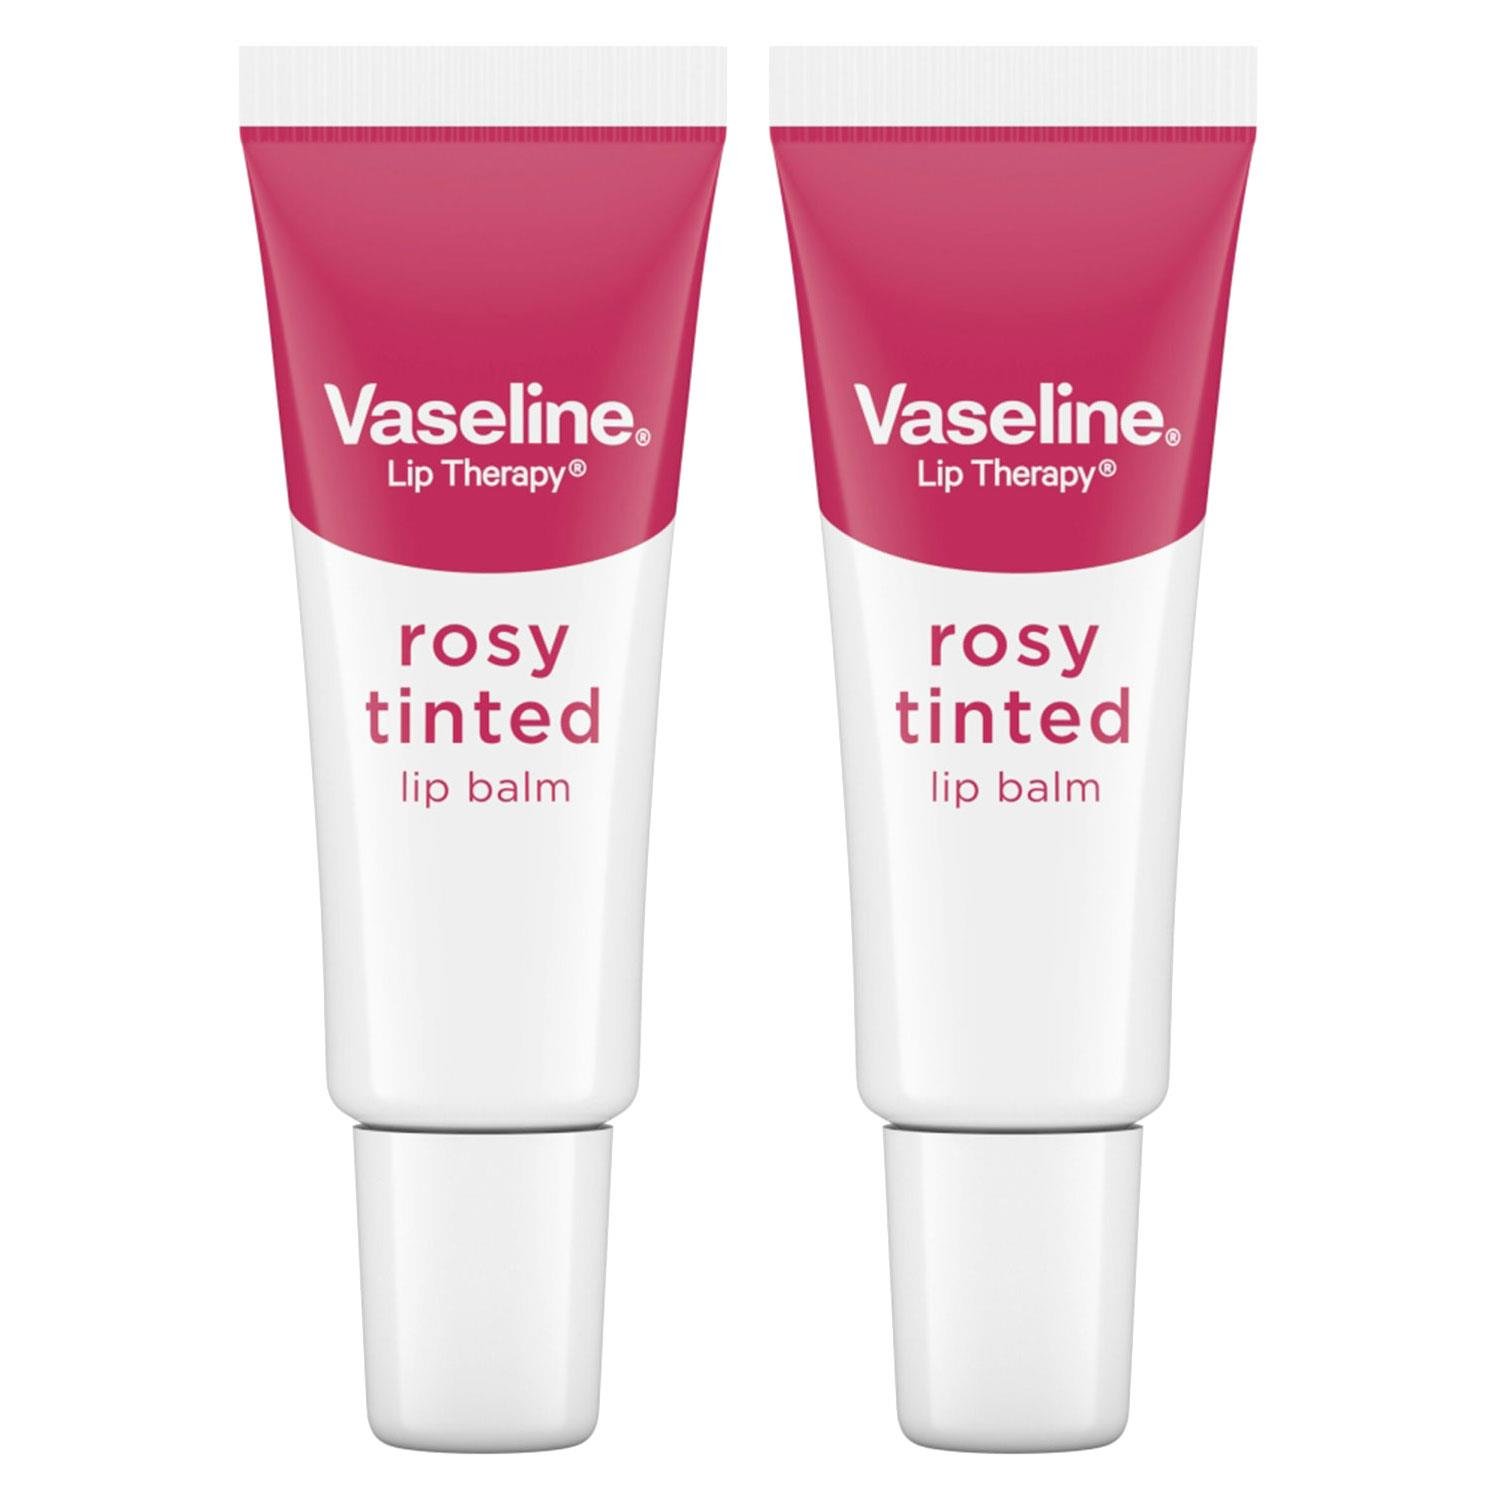 Vaseline Lip Therapy Rosy Tinted Lip Balm 2 x 10g